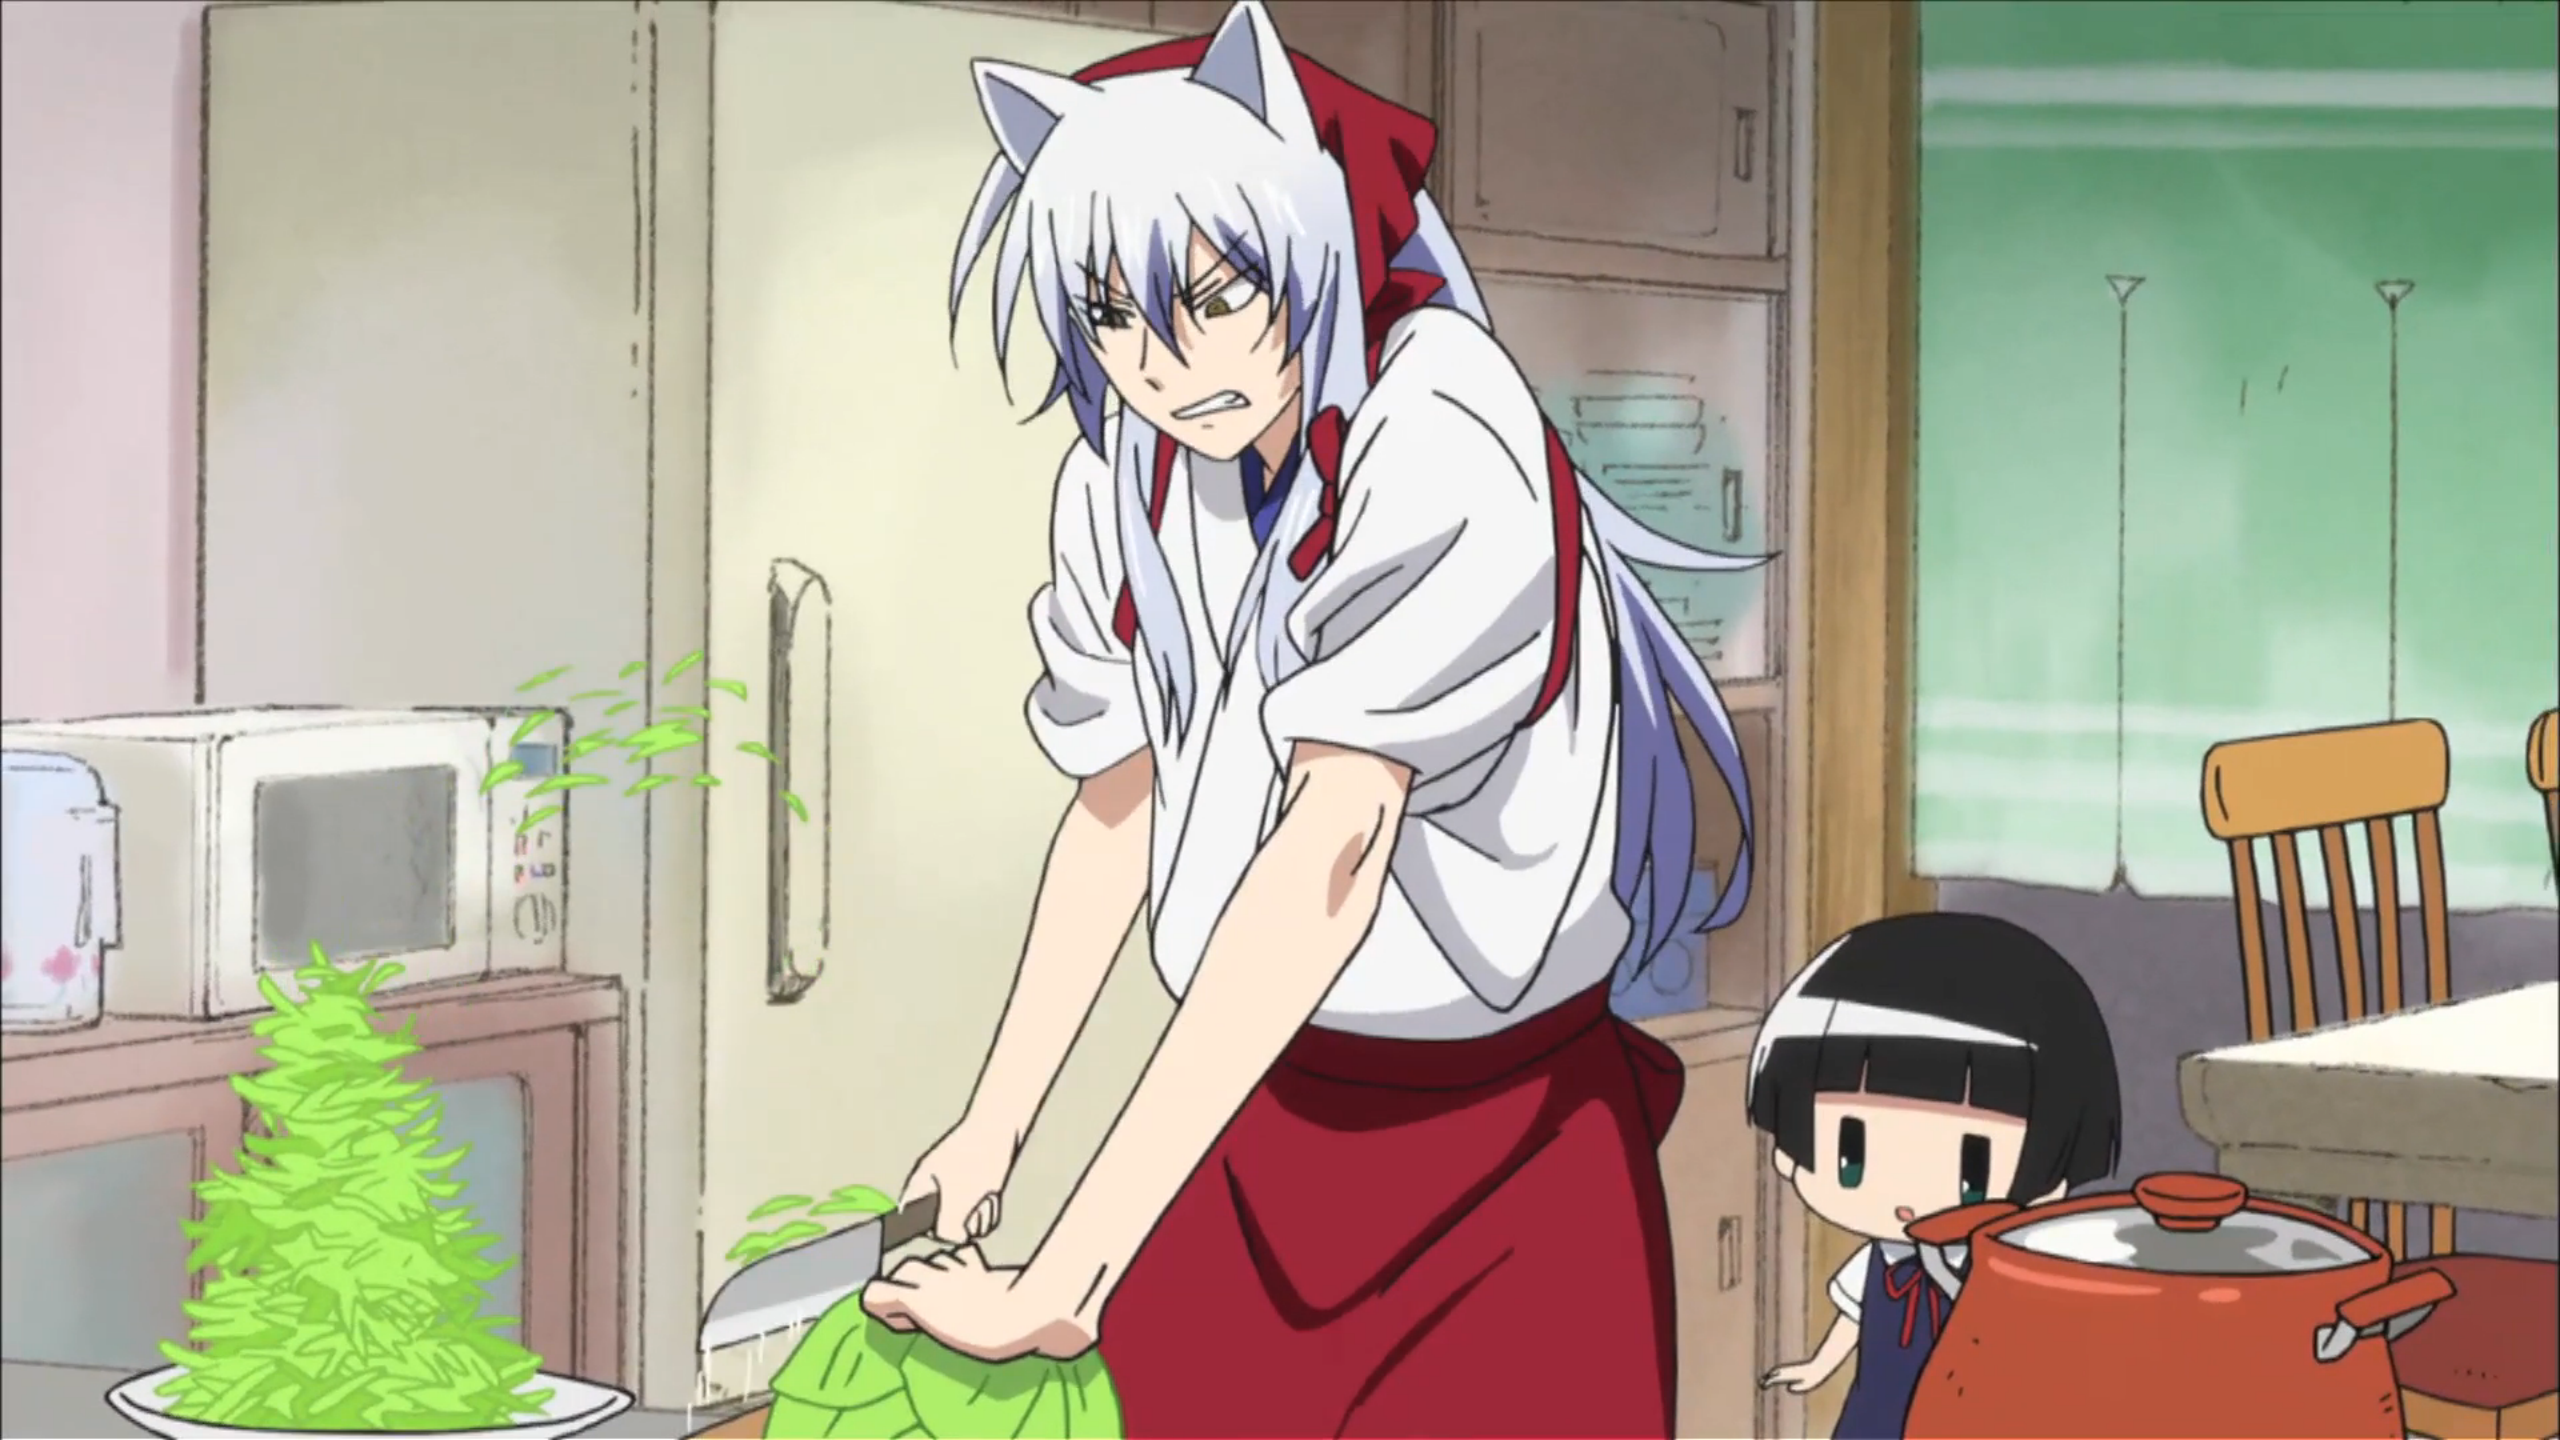 Kokkuri-san cooks, cleans, and is welcome to my house, any day.